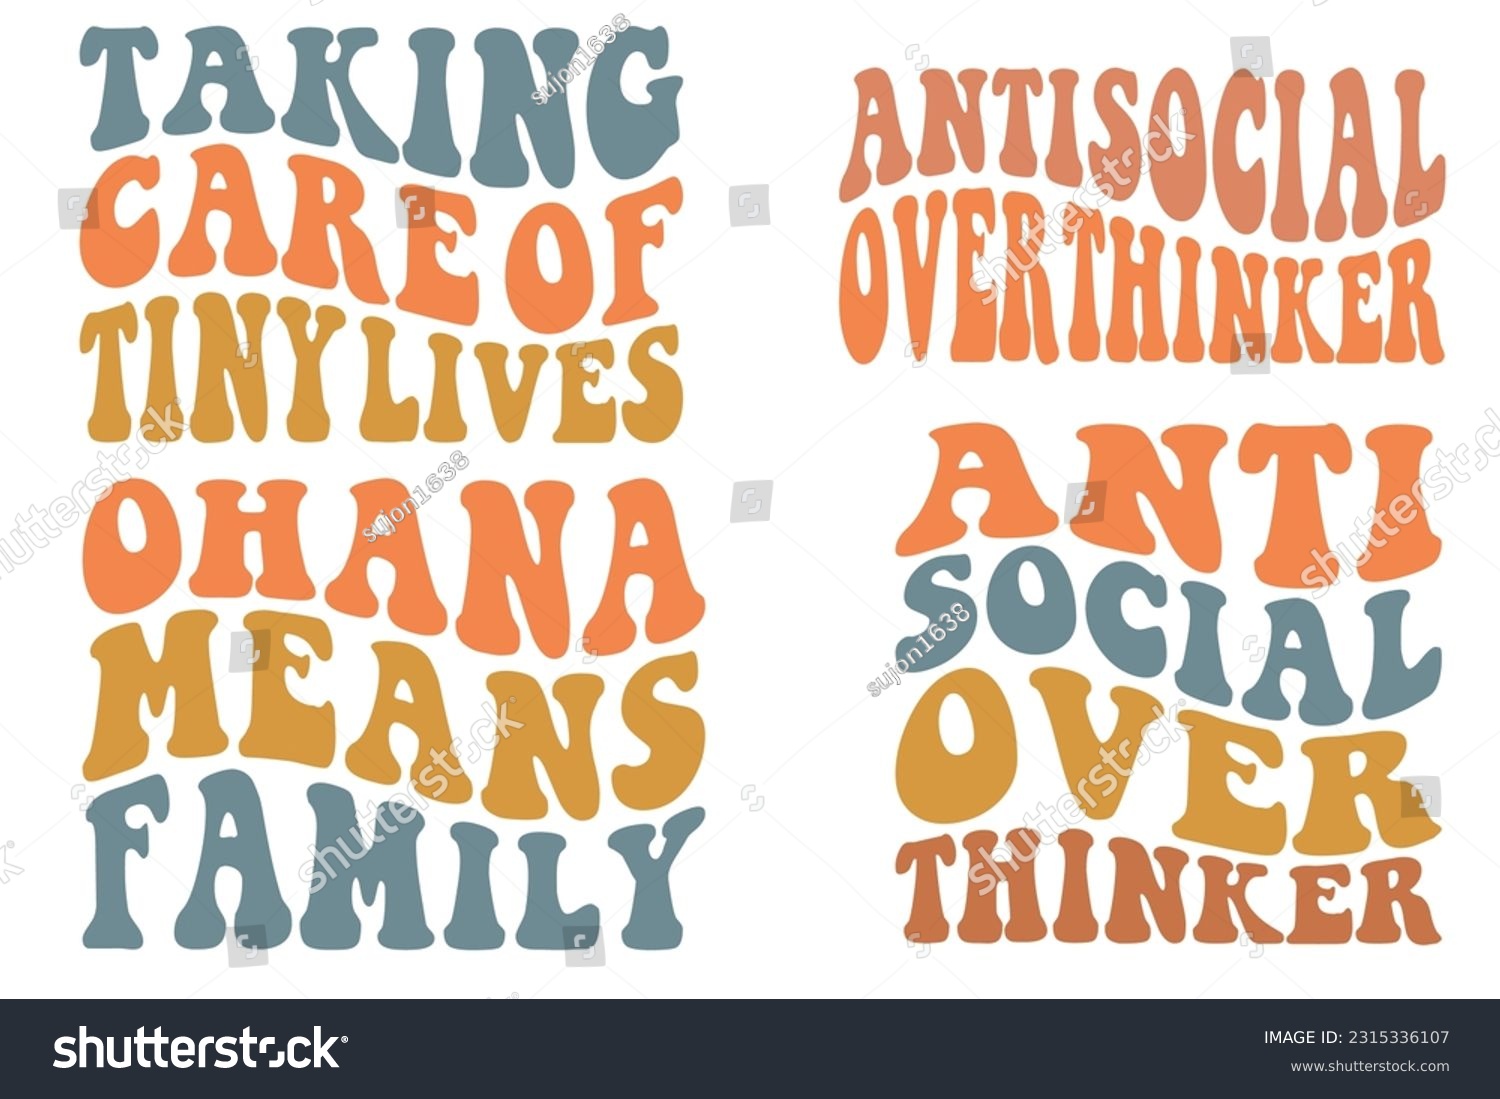 SVG of Taking care of tiny lives, anti-social over thinker, oh Ana means family retro wavy bundle SVG T-shirt designs svg